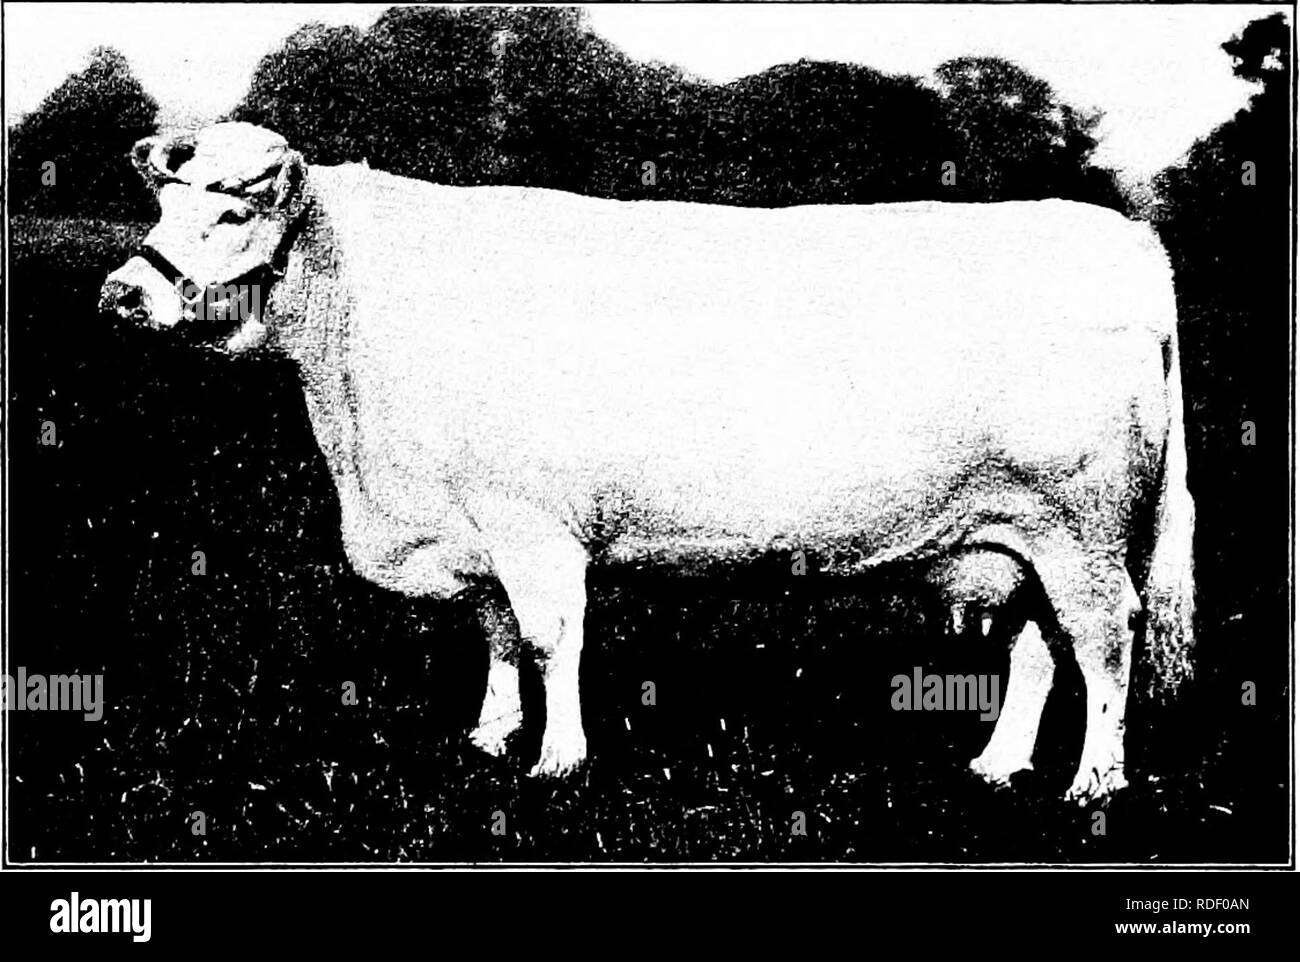 . Types and breeds of farm animals . Livestock. THE SHORTHORN 193 pounds butter fat, equivalent to 506,12 pounds butter. Deduct- ing cost of feed, there was a net profit from Rose of $79,86. One of the very best private dairy records for an entire herd of grade Shorthorns comes from John Kingsbury of South Dakota, who in 1898 reports 16 cows averaging 6000 pounds milk, from which was made an average of 301 pounds 5 ounces butter, while in 1899 the same number of cows yielded an average of 6342 pounds milk and 317 pounds 5 ounces butter.. Fig. 77. White Heather, first-prize and champion Shortho Stock Photo